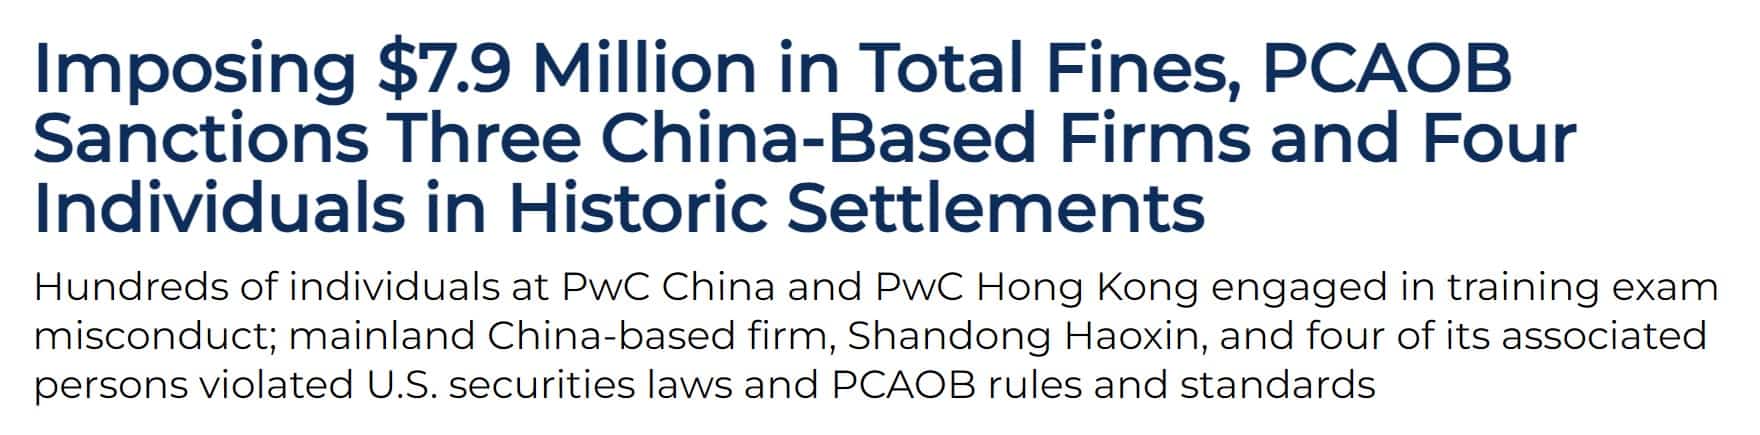 Imposing $7.9 Million in Total Fines, PCAOB Sanctions Three China-Based Firms and Four Individuals in Historic Settlements